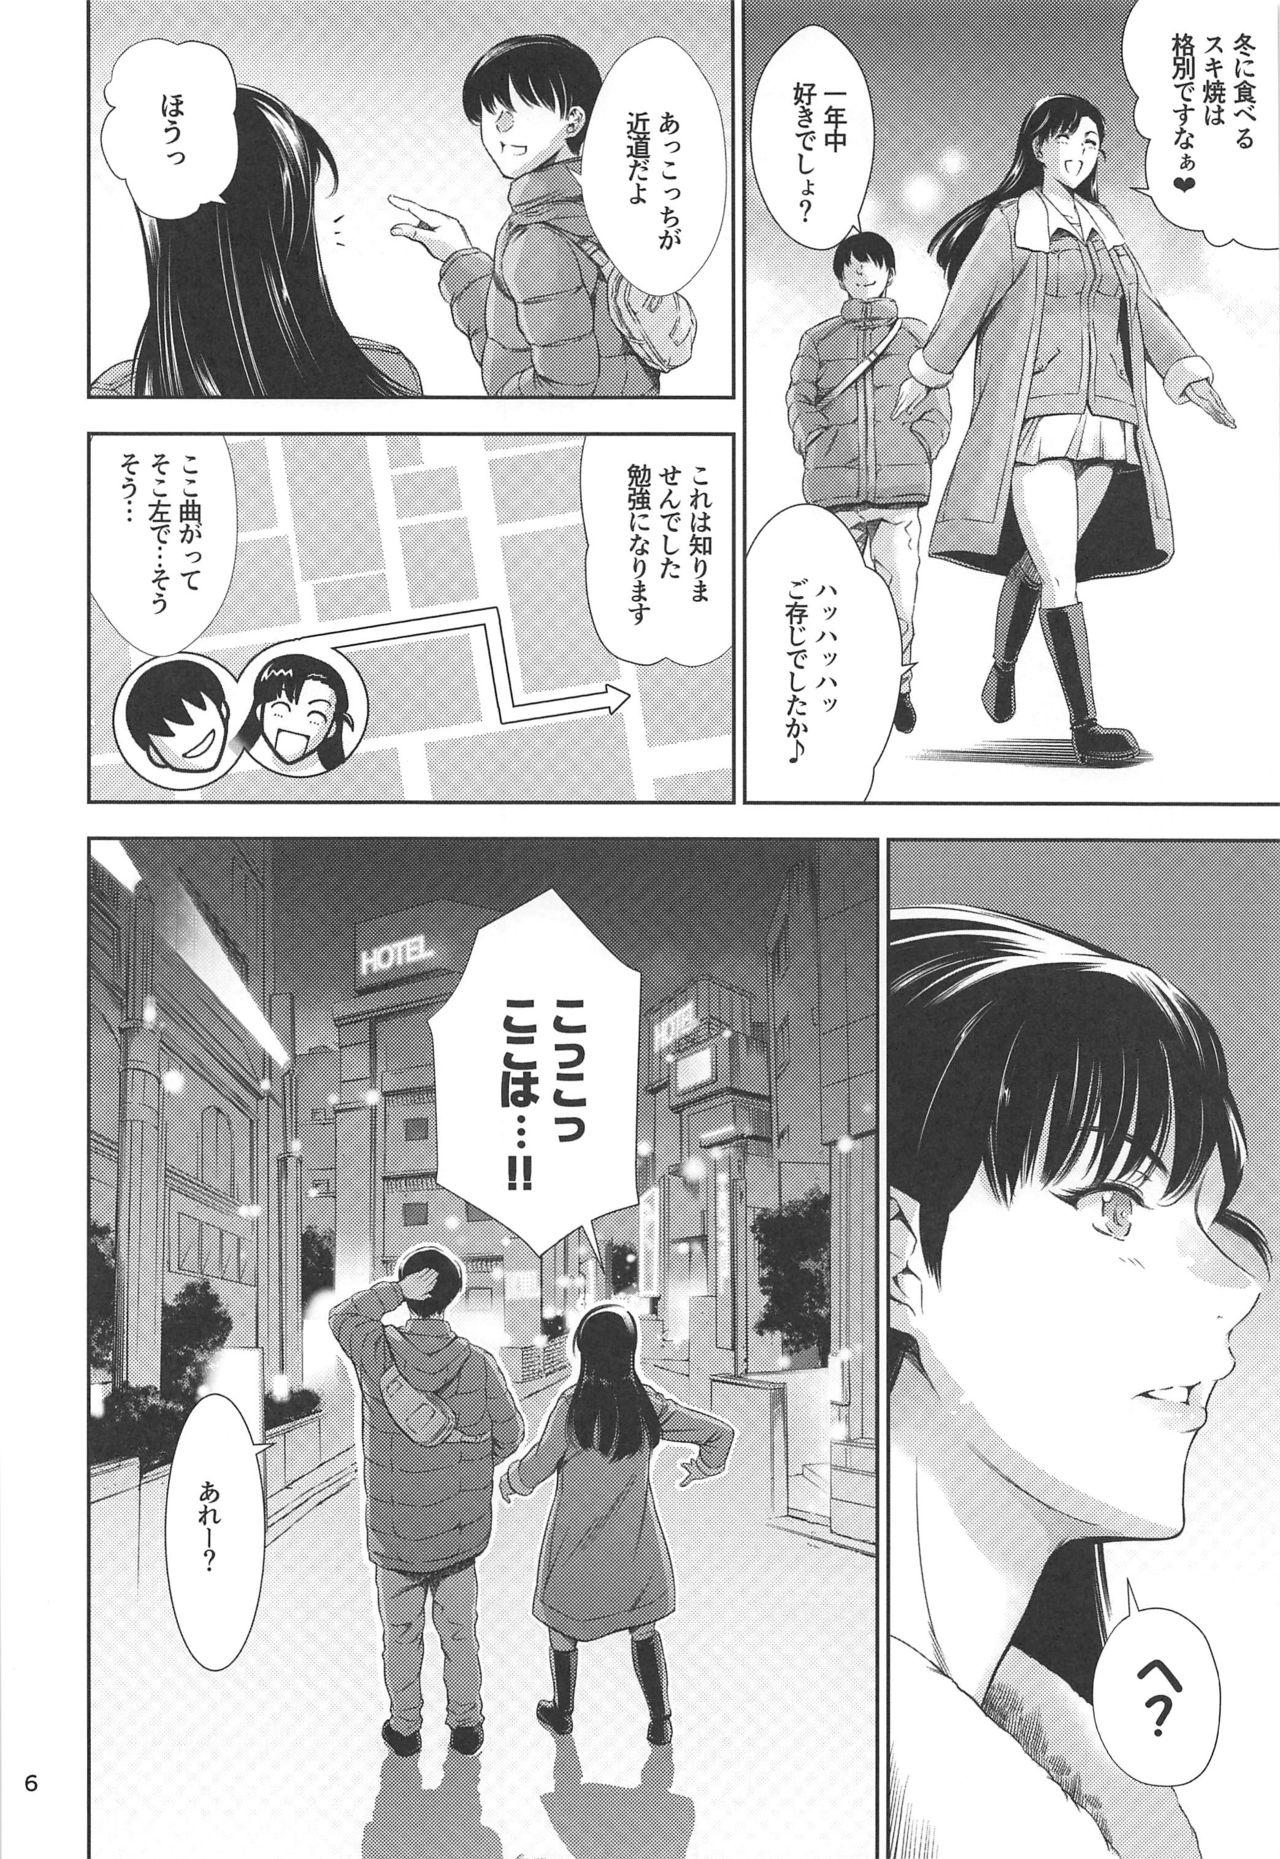 Rimming Kinuyo-chan to LoveHo - Girls und panzer Horny Slut - Page 5